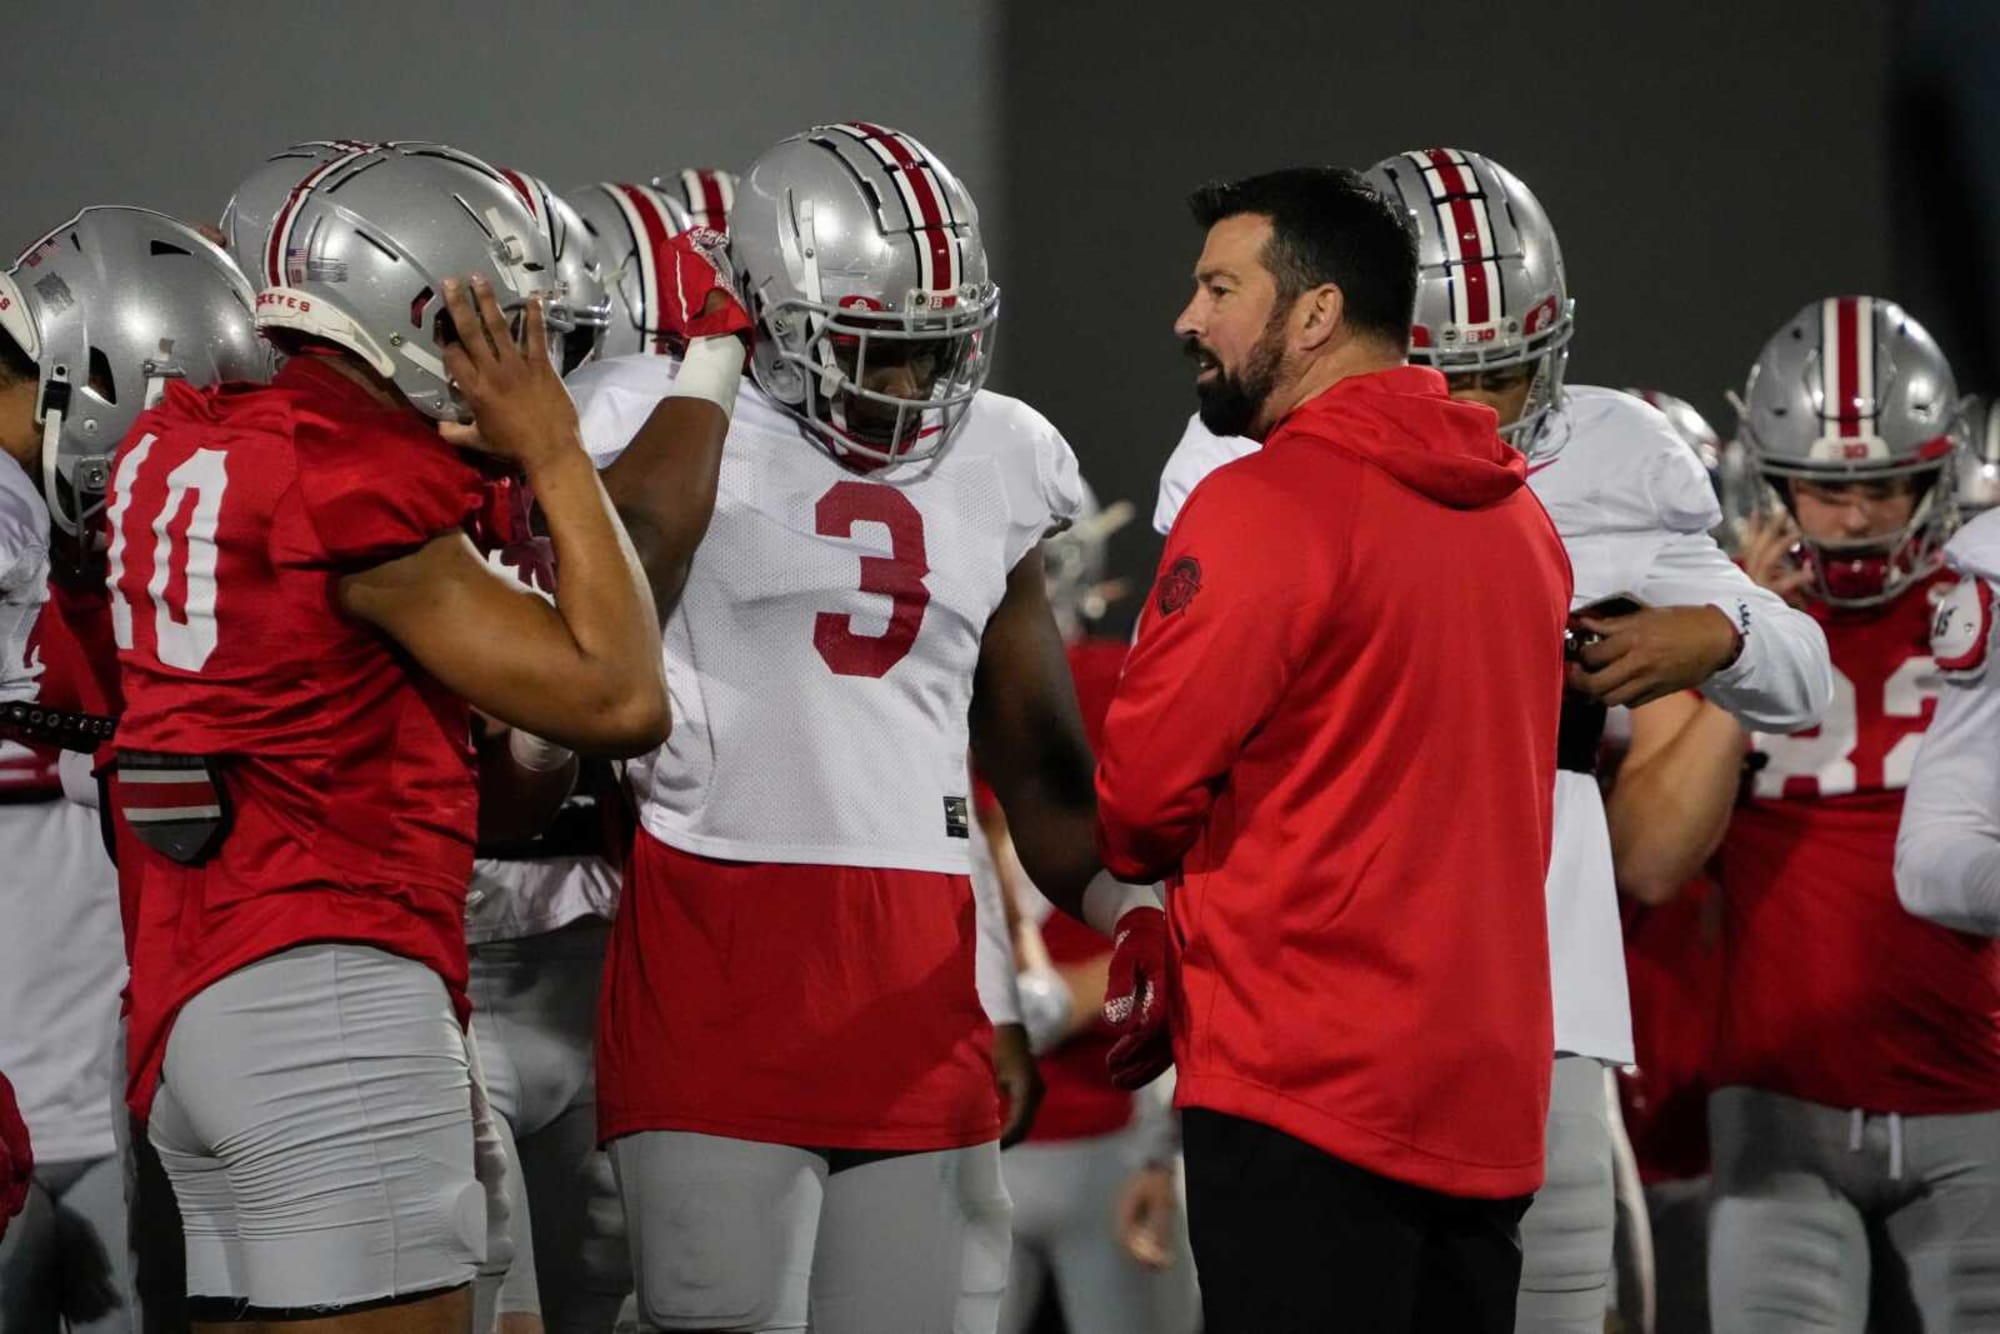 Ohio State Football several 5star recruits this weekend